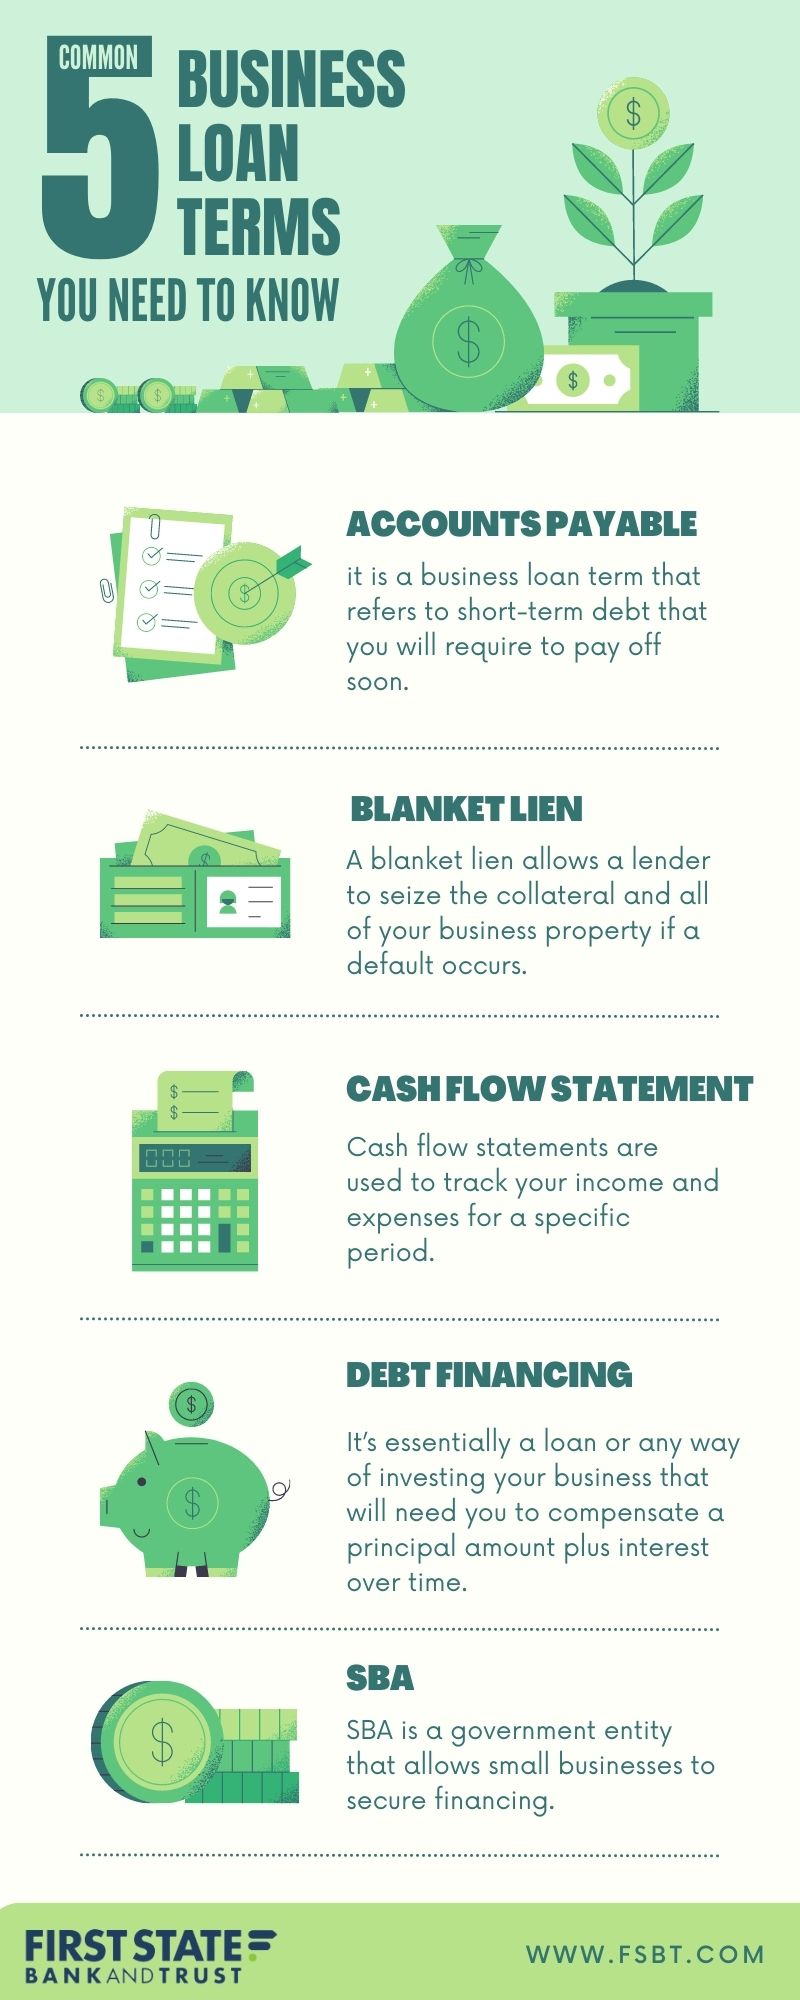 Five Common Business Loan Terms You Need to Know